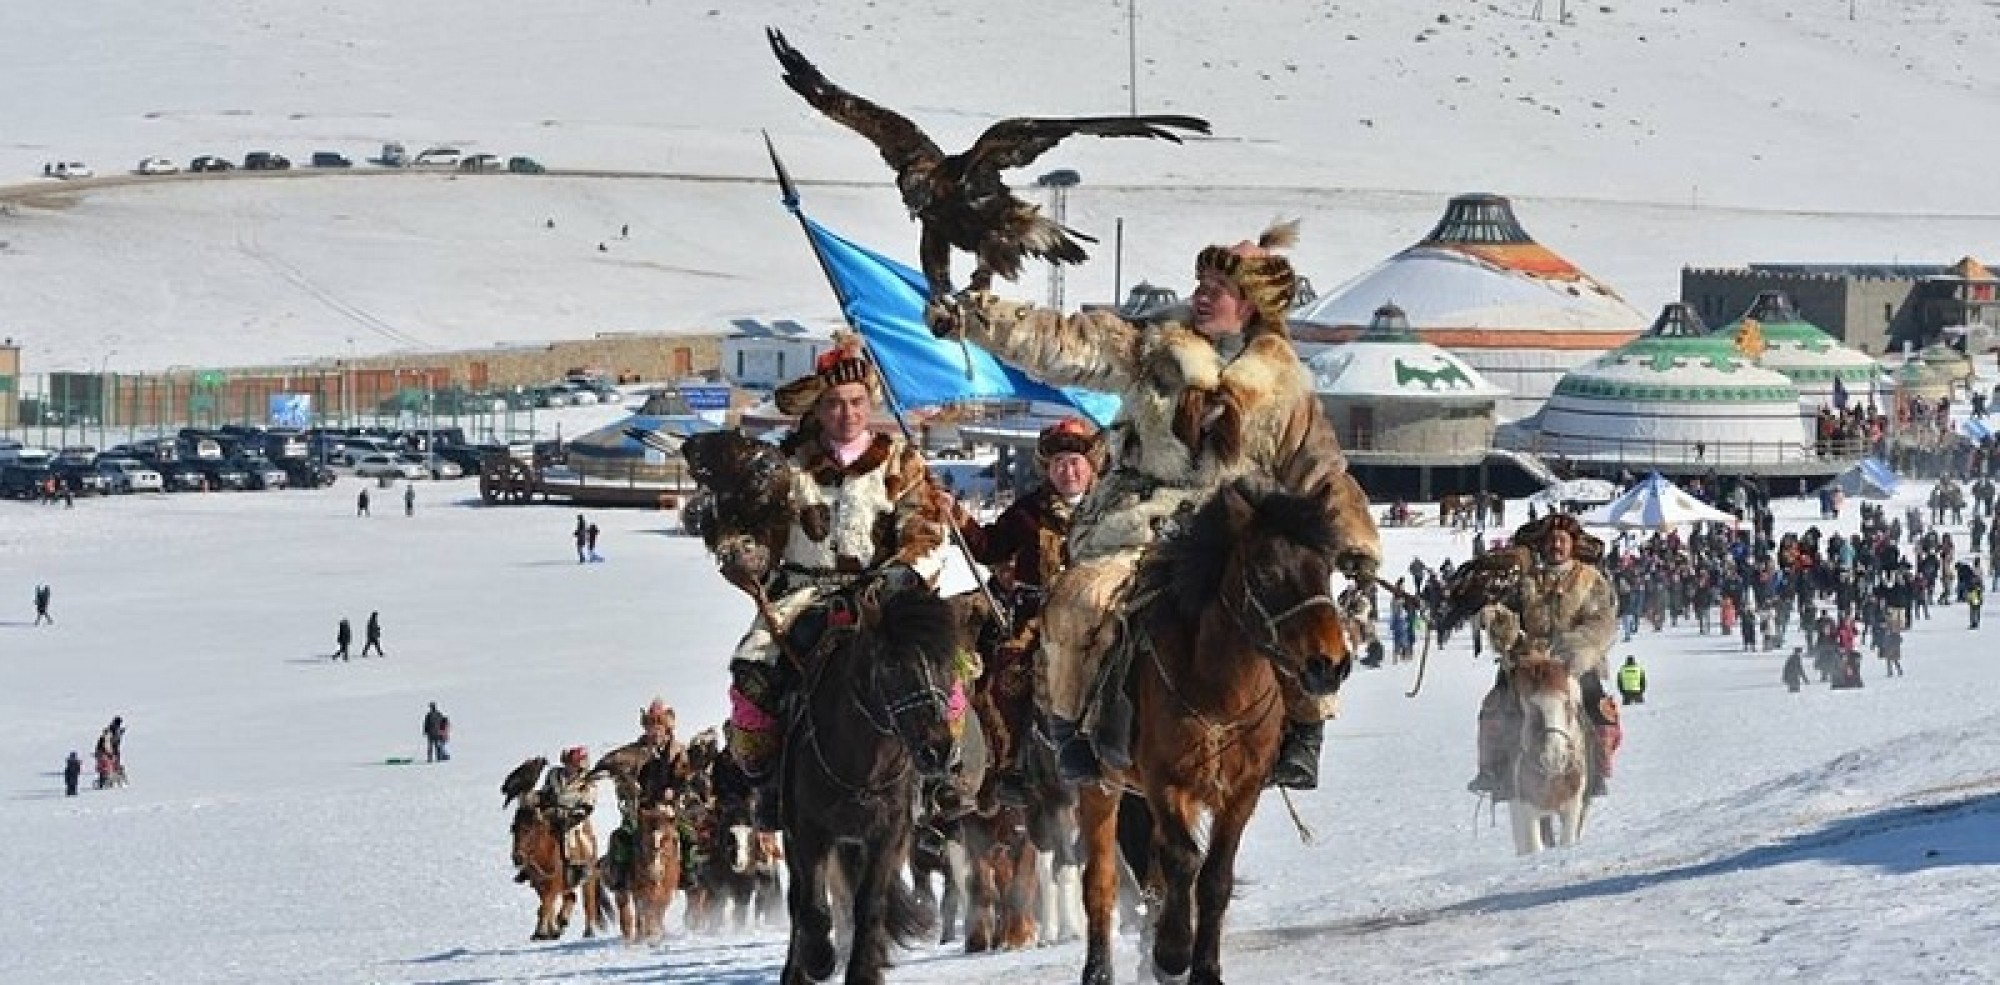 Mongolia to hold Spring Golden Eagle Festival in March to boost tourism